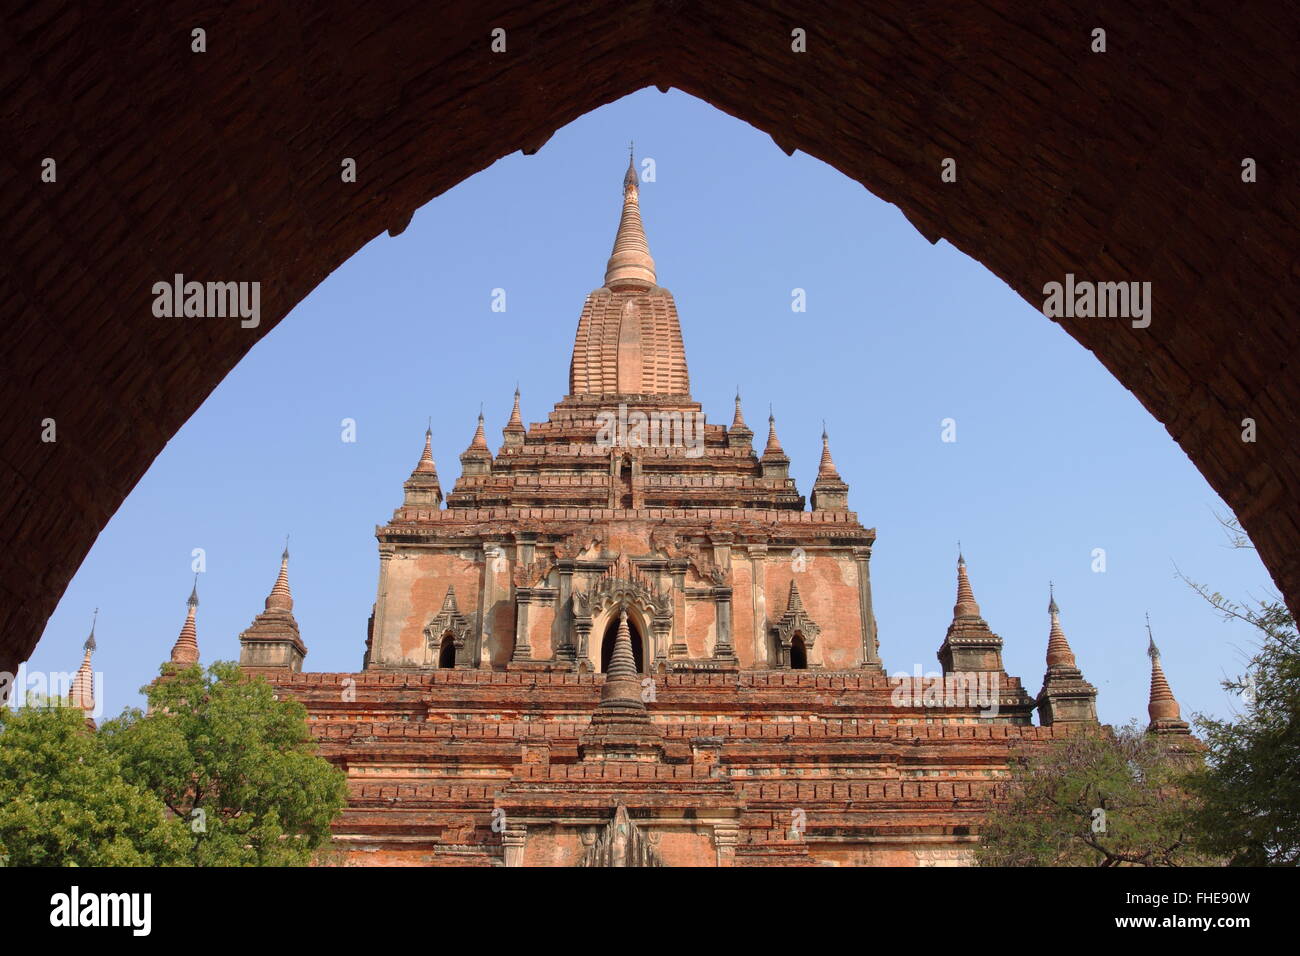 Sulamani, old Buddhist temples and pagodas in Bagan, Myanmar Stock Photo